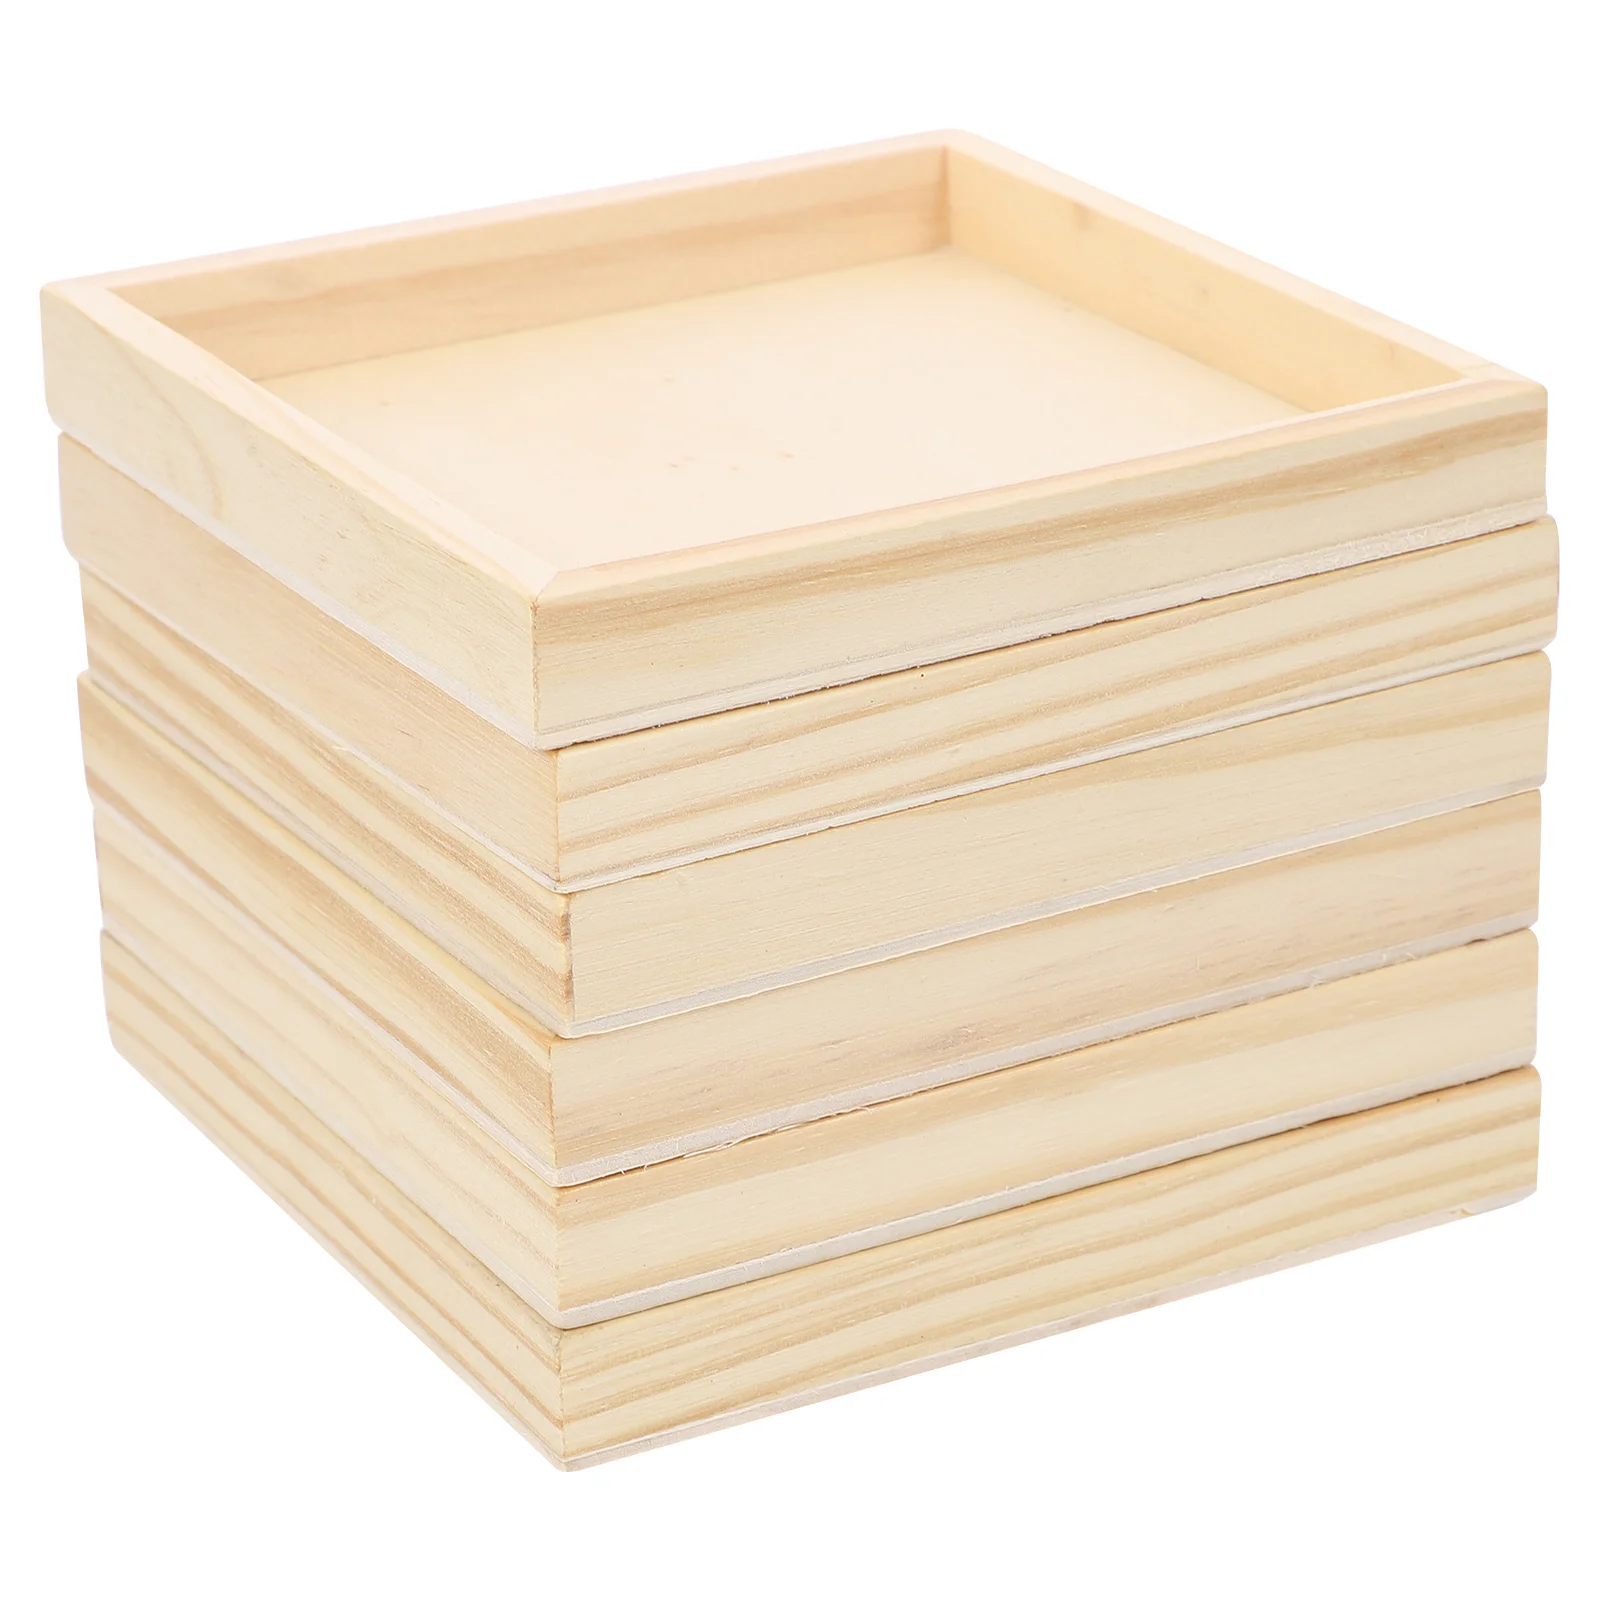 

Tray Wooden Puzzle Wood Trays Painting Unfinished Crafts Serving Cube Board Boards Blank Sorting Canvas Jigsaw Hexahedral Craft